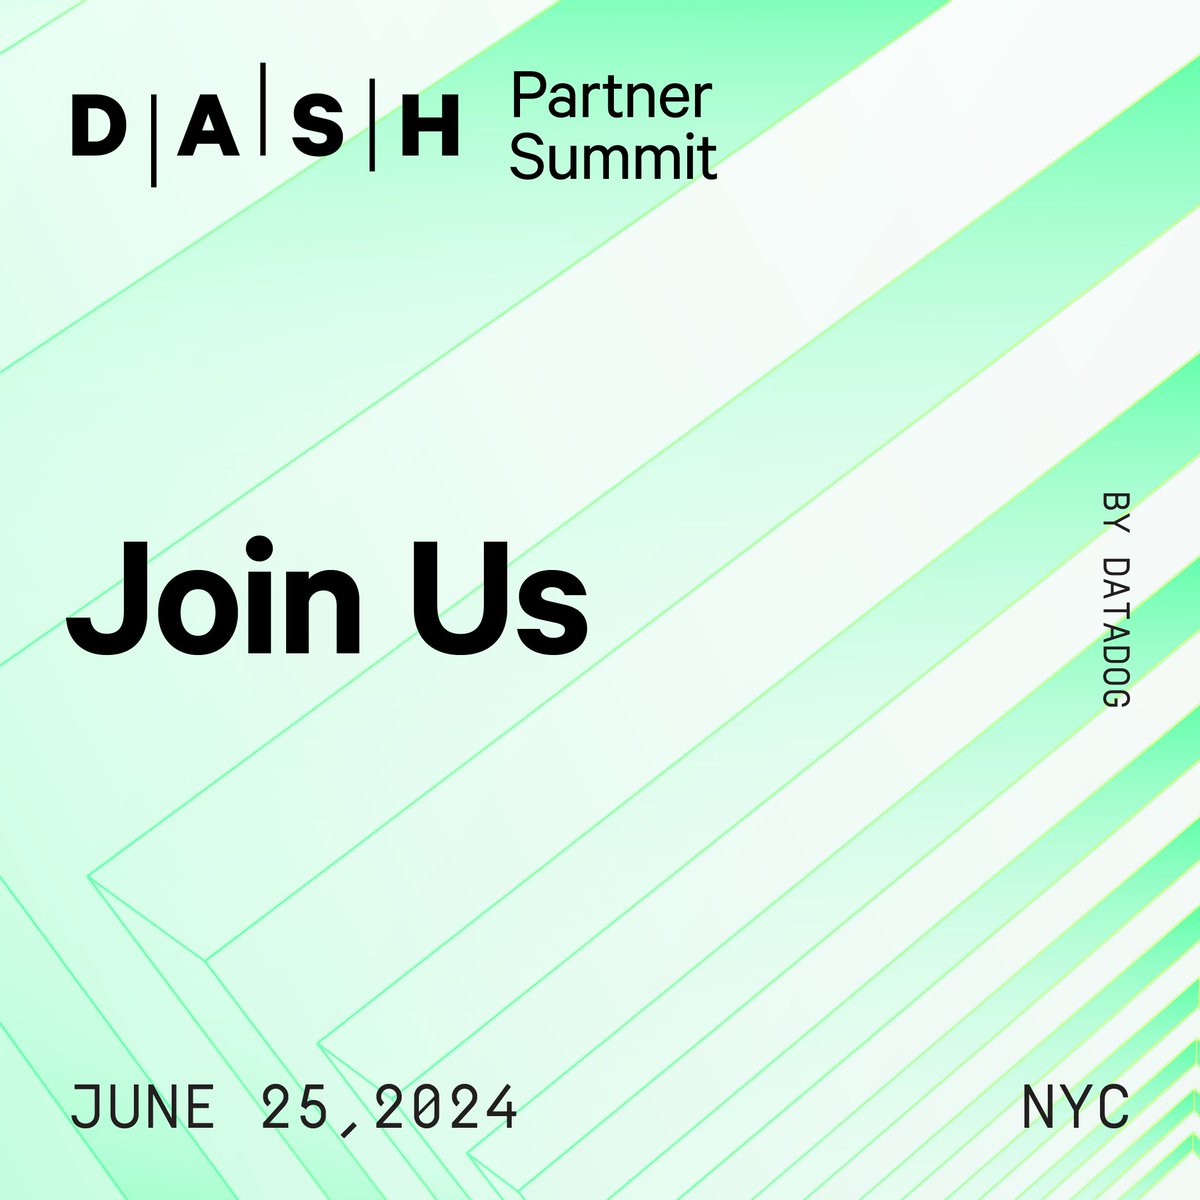 T-5 days until early bird pricing ends for the #DASH Partner Summit in NYC. Gain exclusive insights into the latest trends and developments in the Datadog Partner Network. Secure your registration with early bird pricing today: dashcon.io/partner-summit/